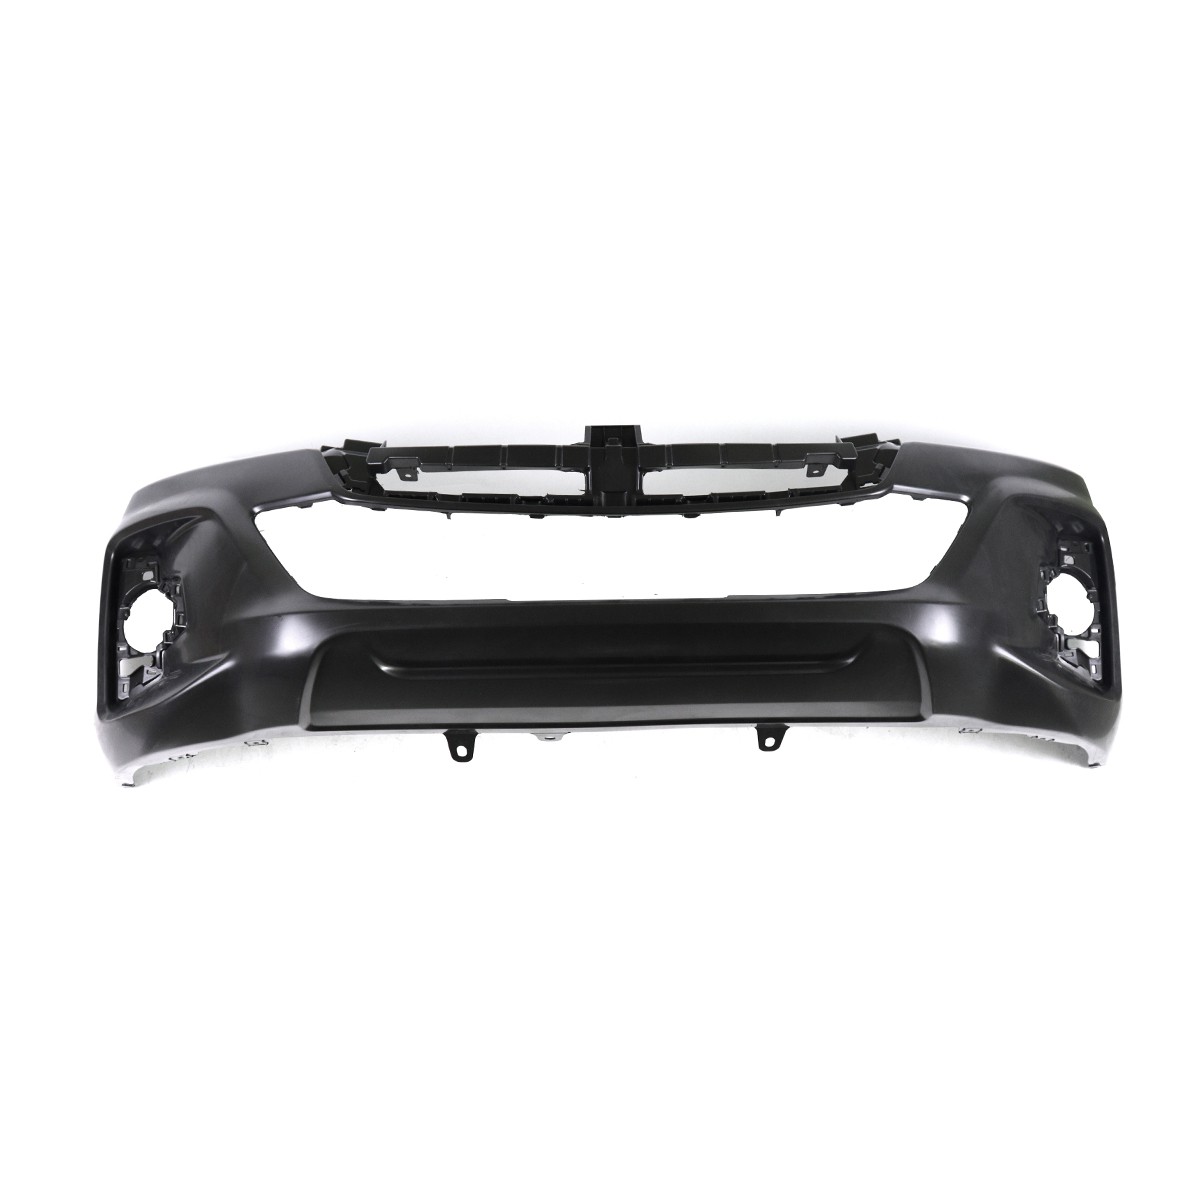 Front Bumper for Toyota Revo 2016-2018 Update to Rocco 2020